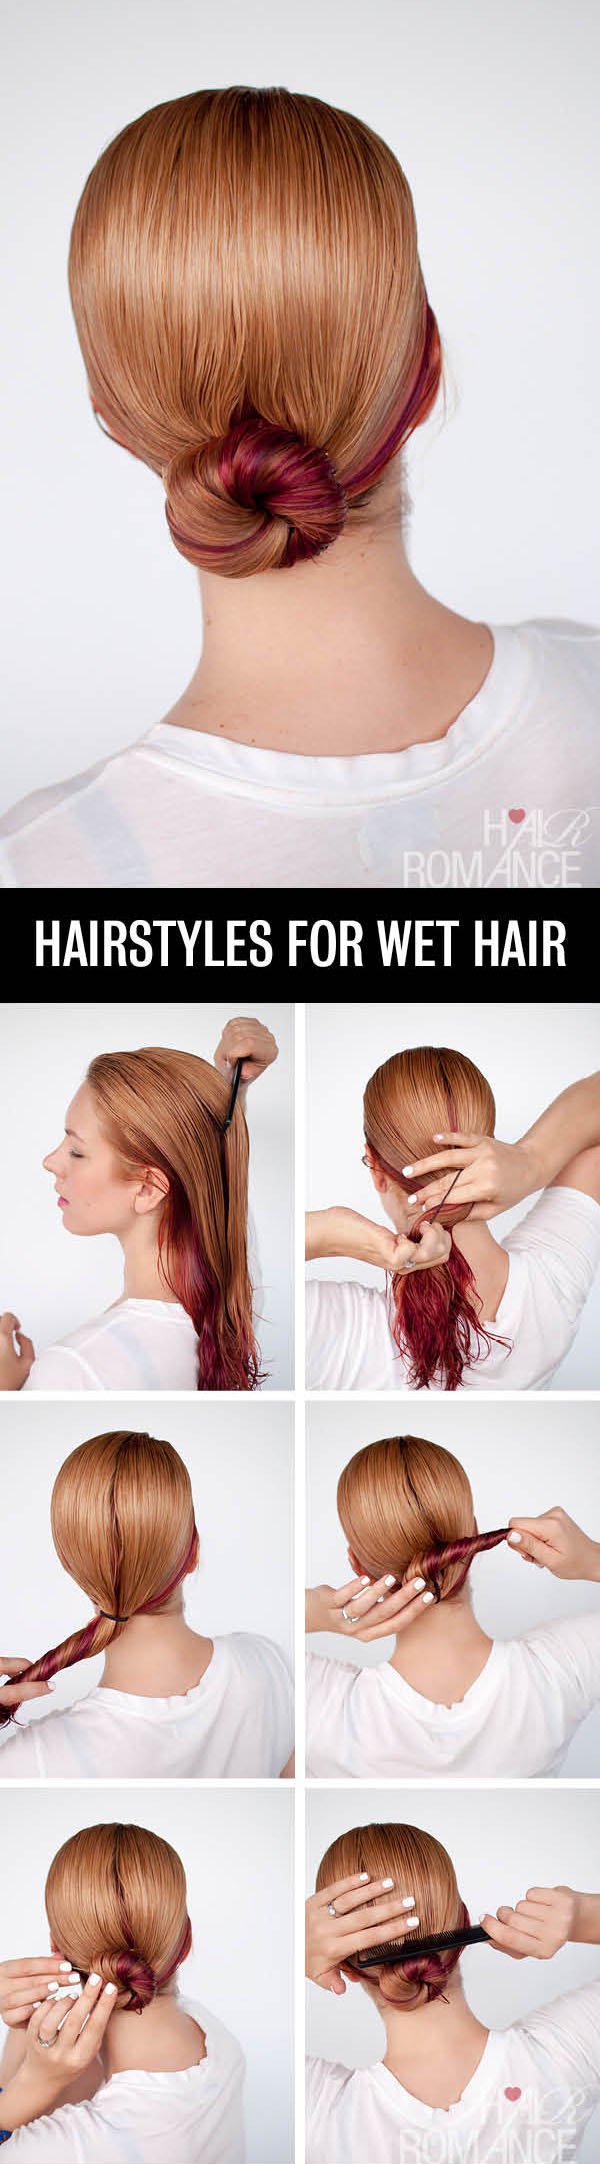 Simple Hairstyle Tutorial for Wet Hair